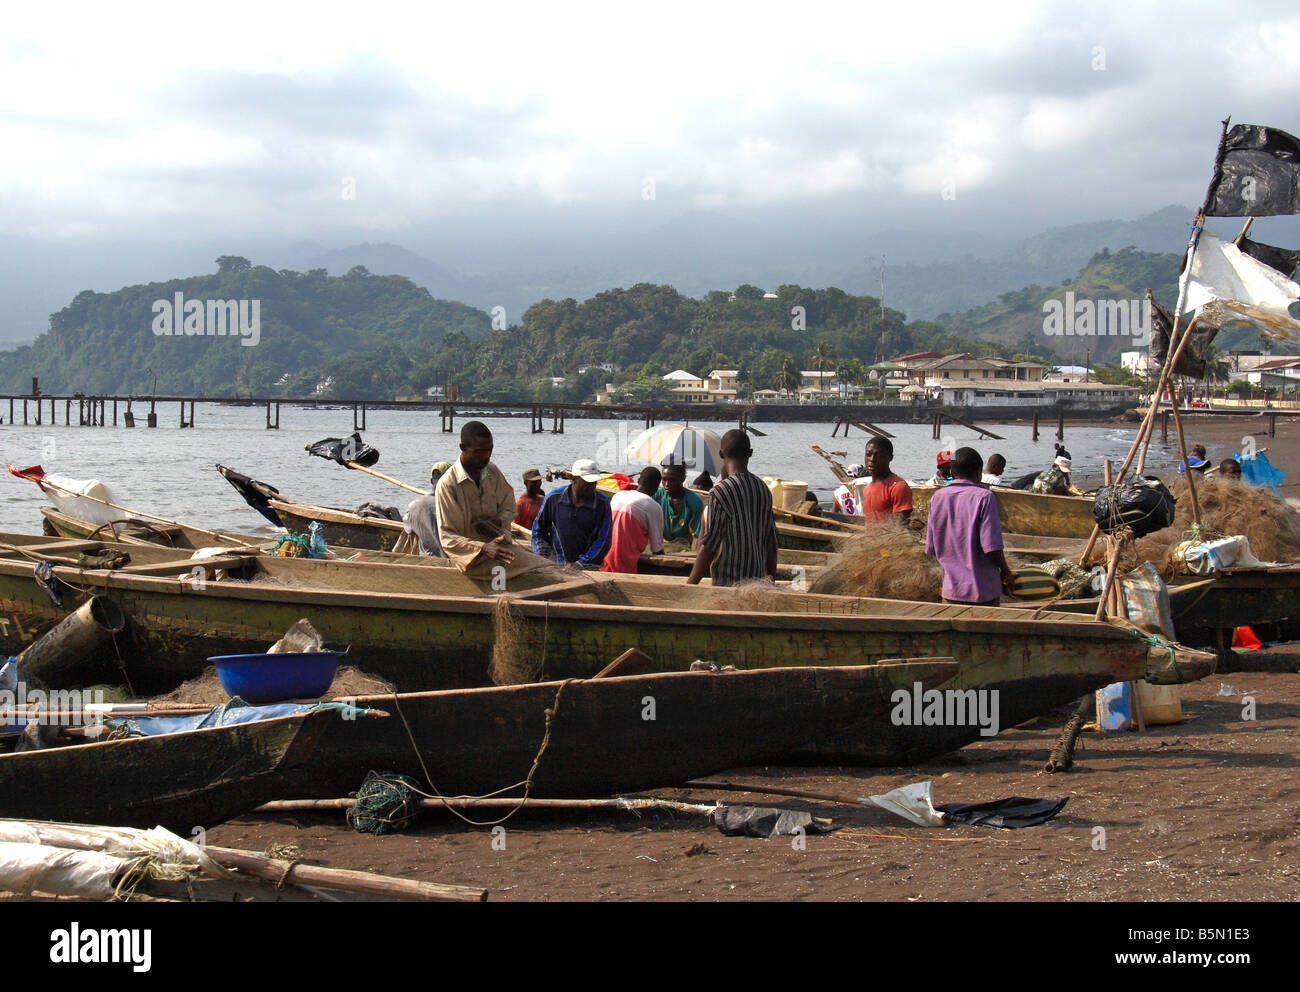 Fishermen and boats at Limbé Cameroon West Africa Mount Cameroon in background Stock Photo